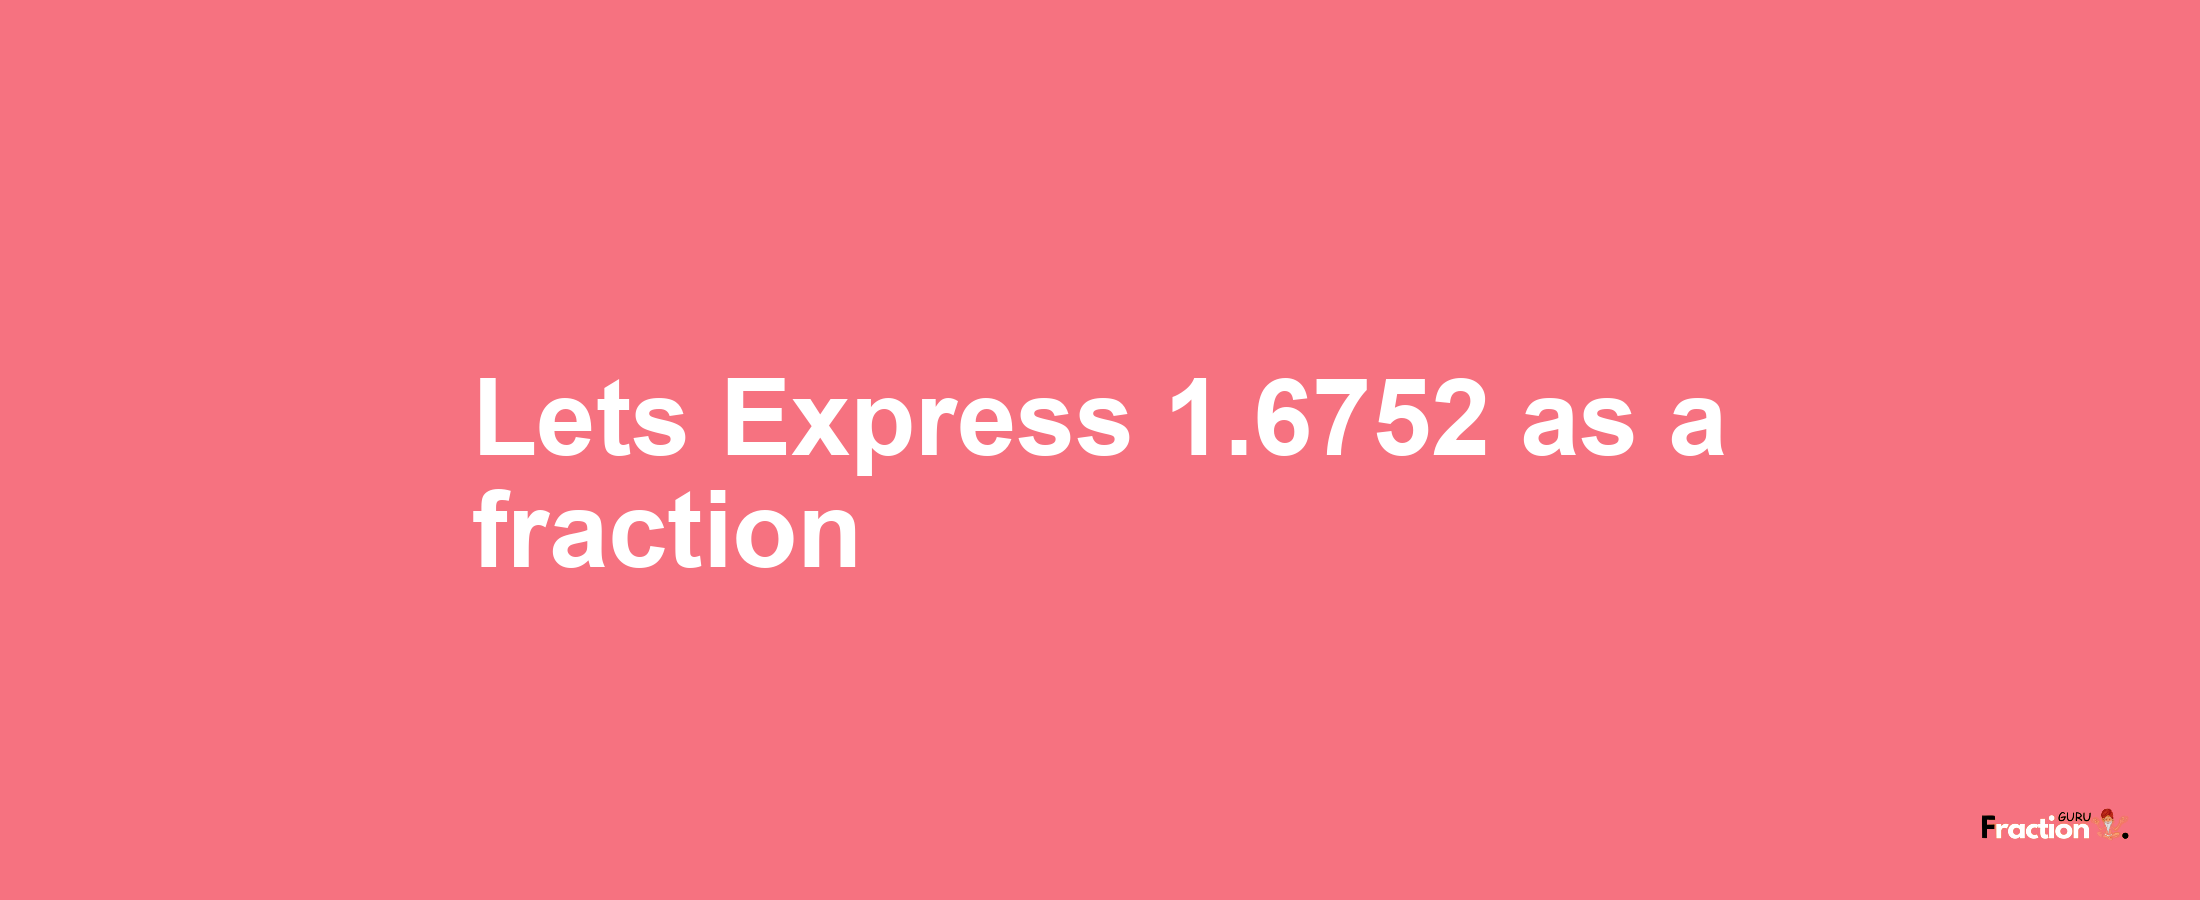 Lets Express 1.6752 as afraction